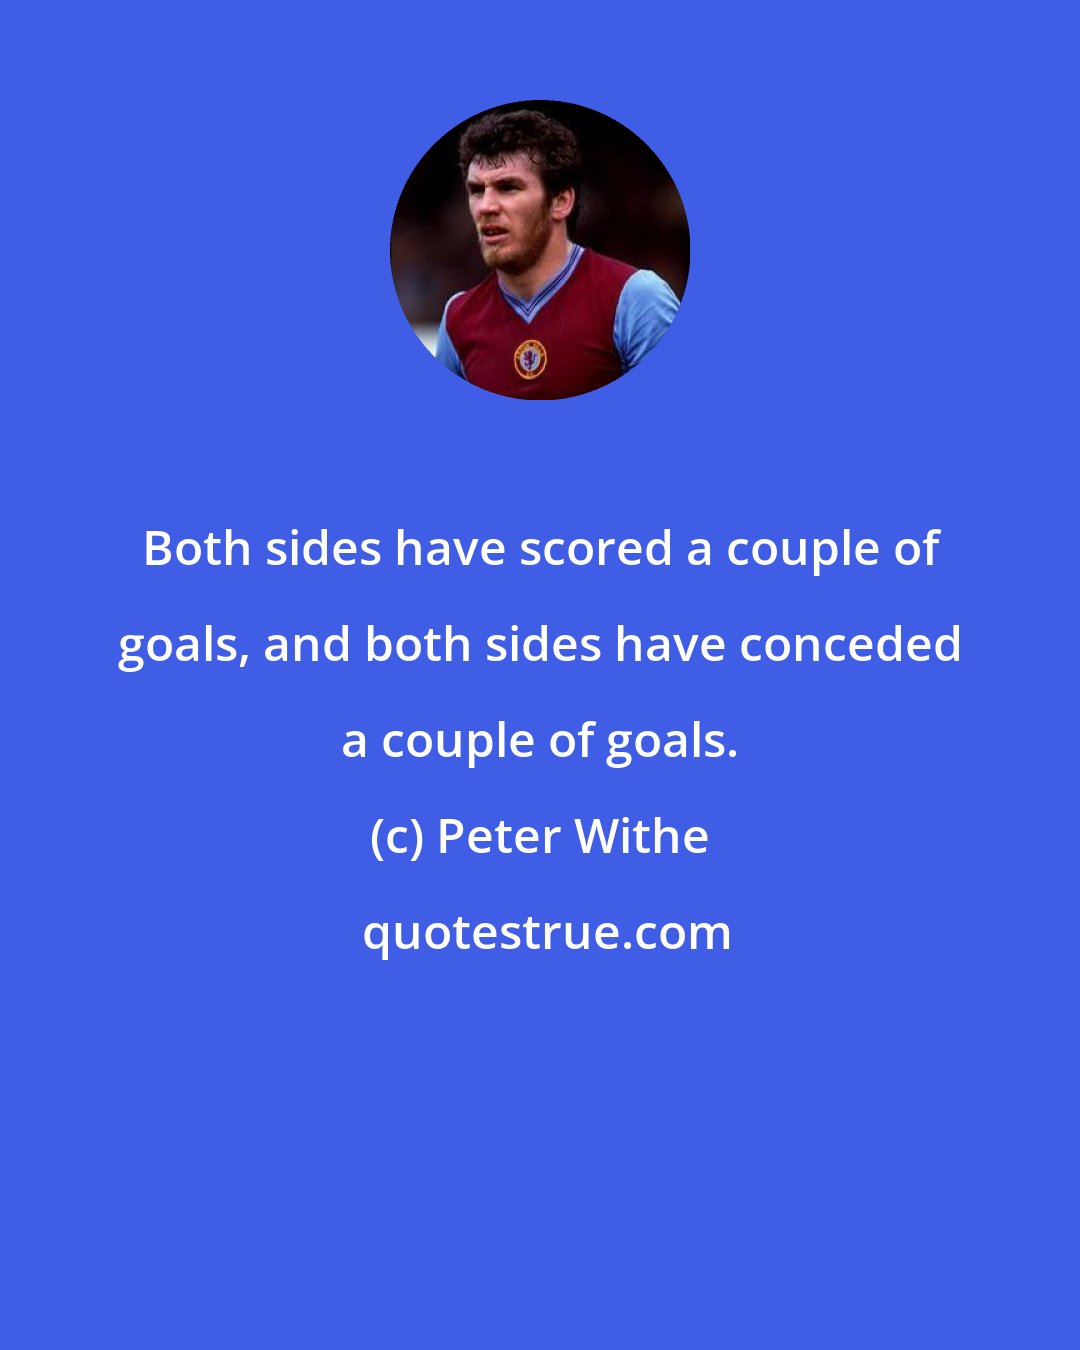 Peter Withe: Both sides have scored a couple of goals, and both sides have conceded a couple of goals.